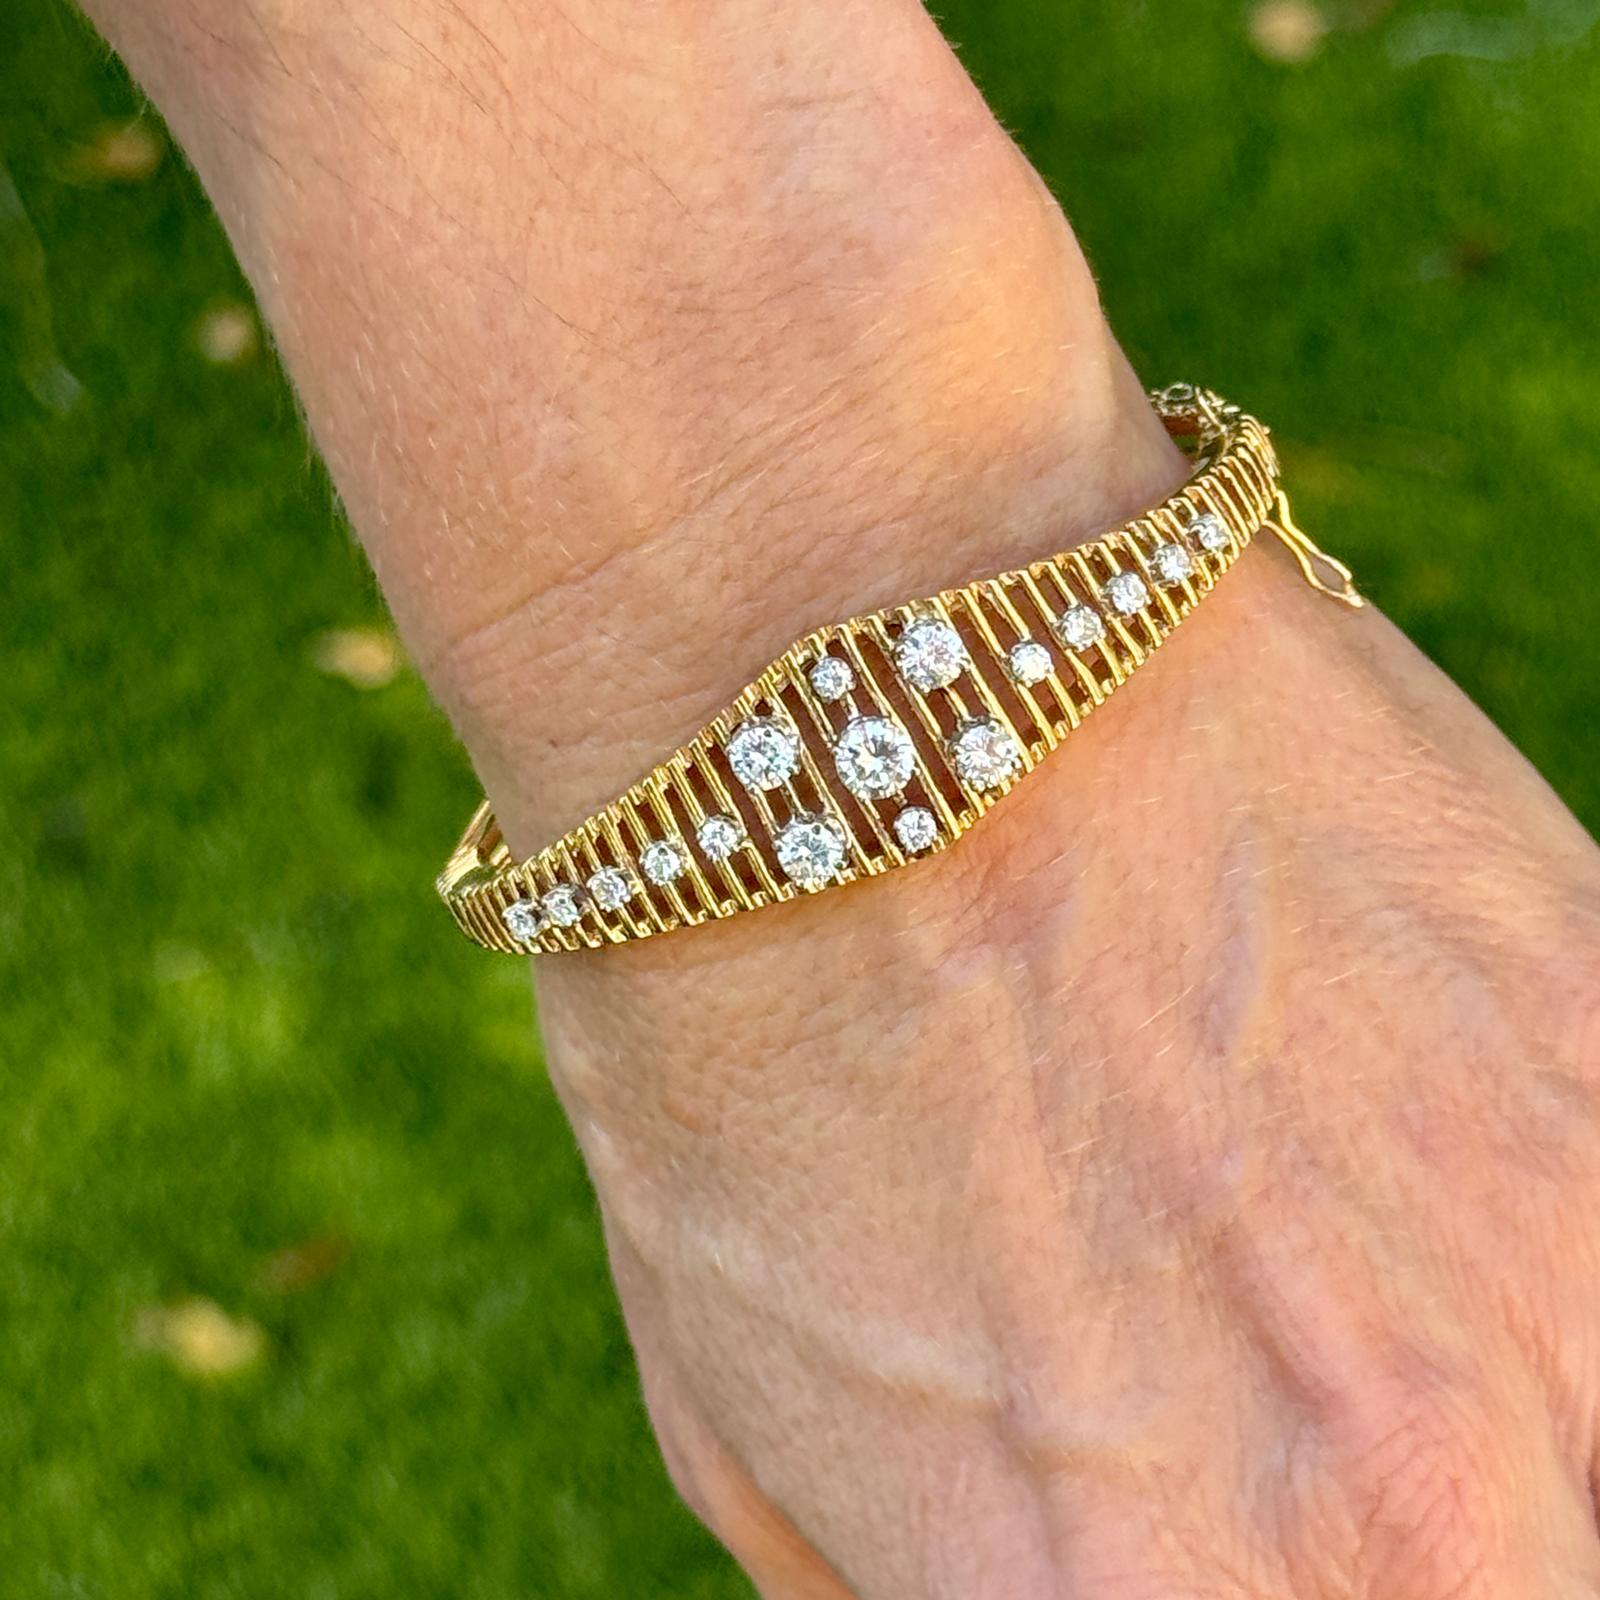 The vintage bangle bracelet is a stunning example of classic elegance and craftsmanship. The bracelet is fashioned in 14 karat yellow gold and features a unique graduated open design that beautifully showcases a collection of 17 round brilliant cut